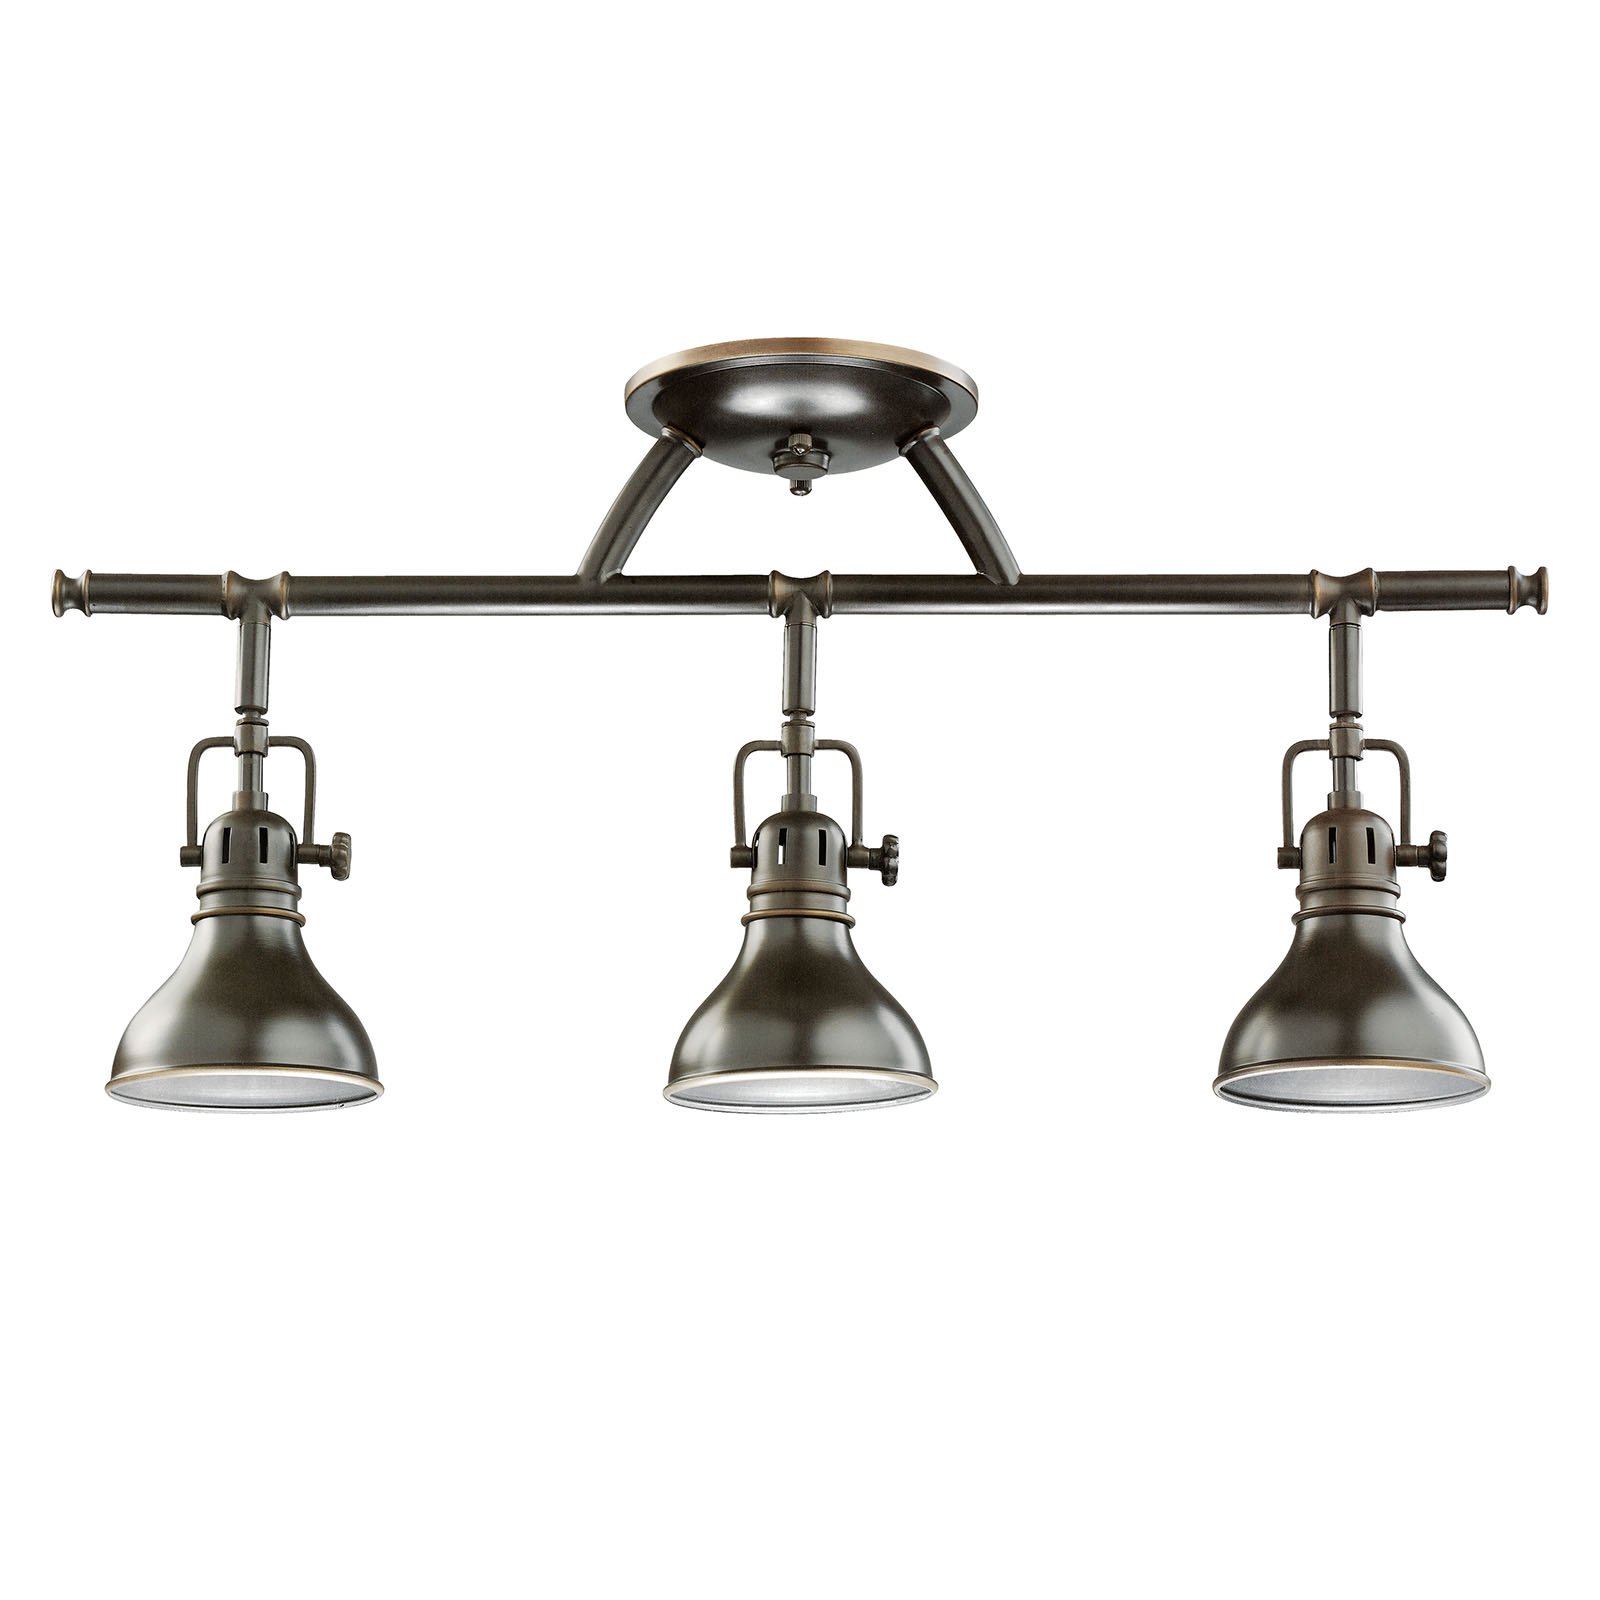 Classic industrial form in this Adjustable Rail light in Olde Bronze(R)  expands your decorating options. Versatile 3-light swivel head focuses light in multiple directions. Lamps swivel 90 degrees and rotate 350 degrees.